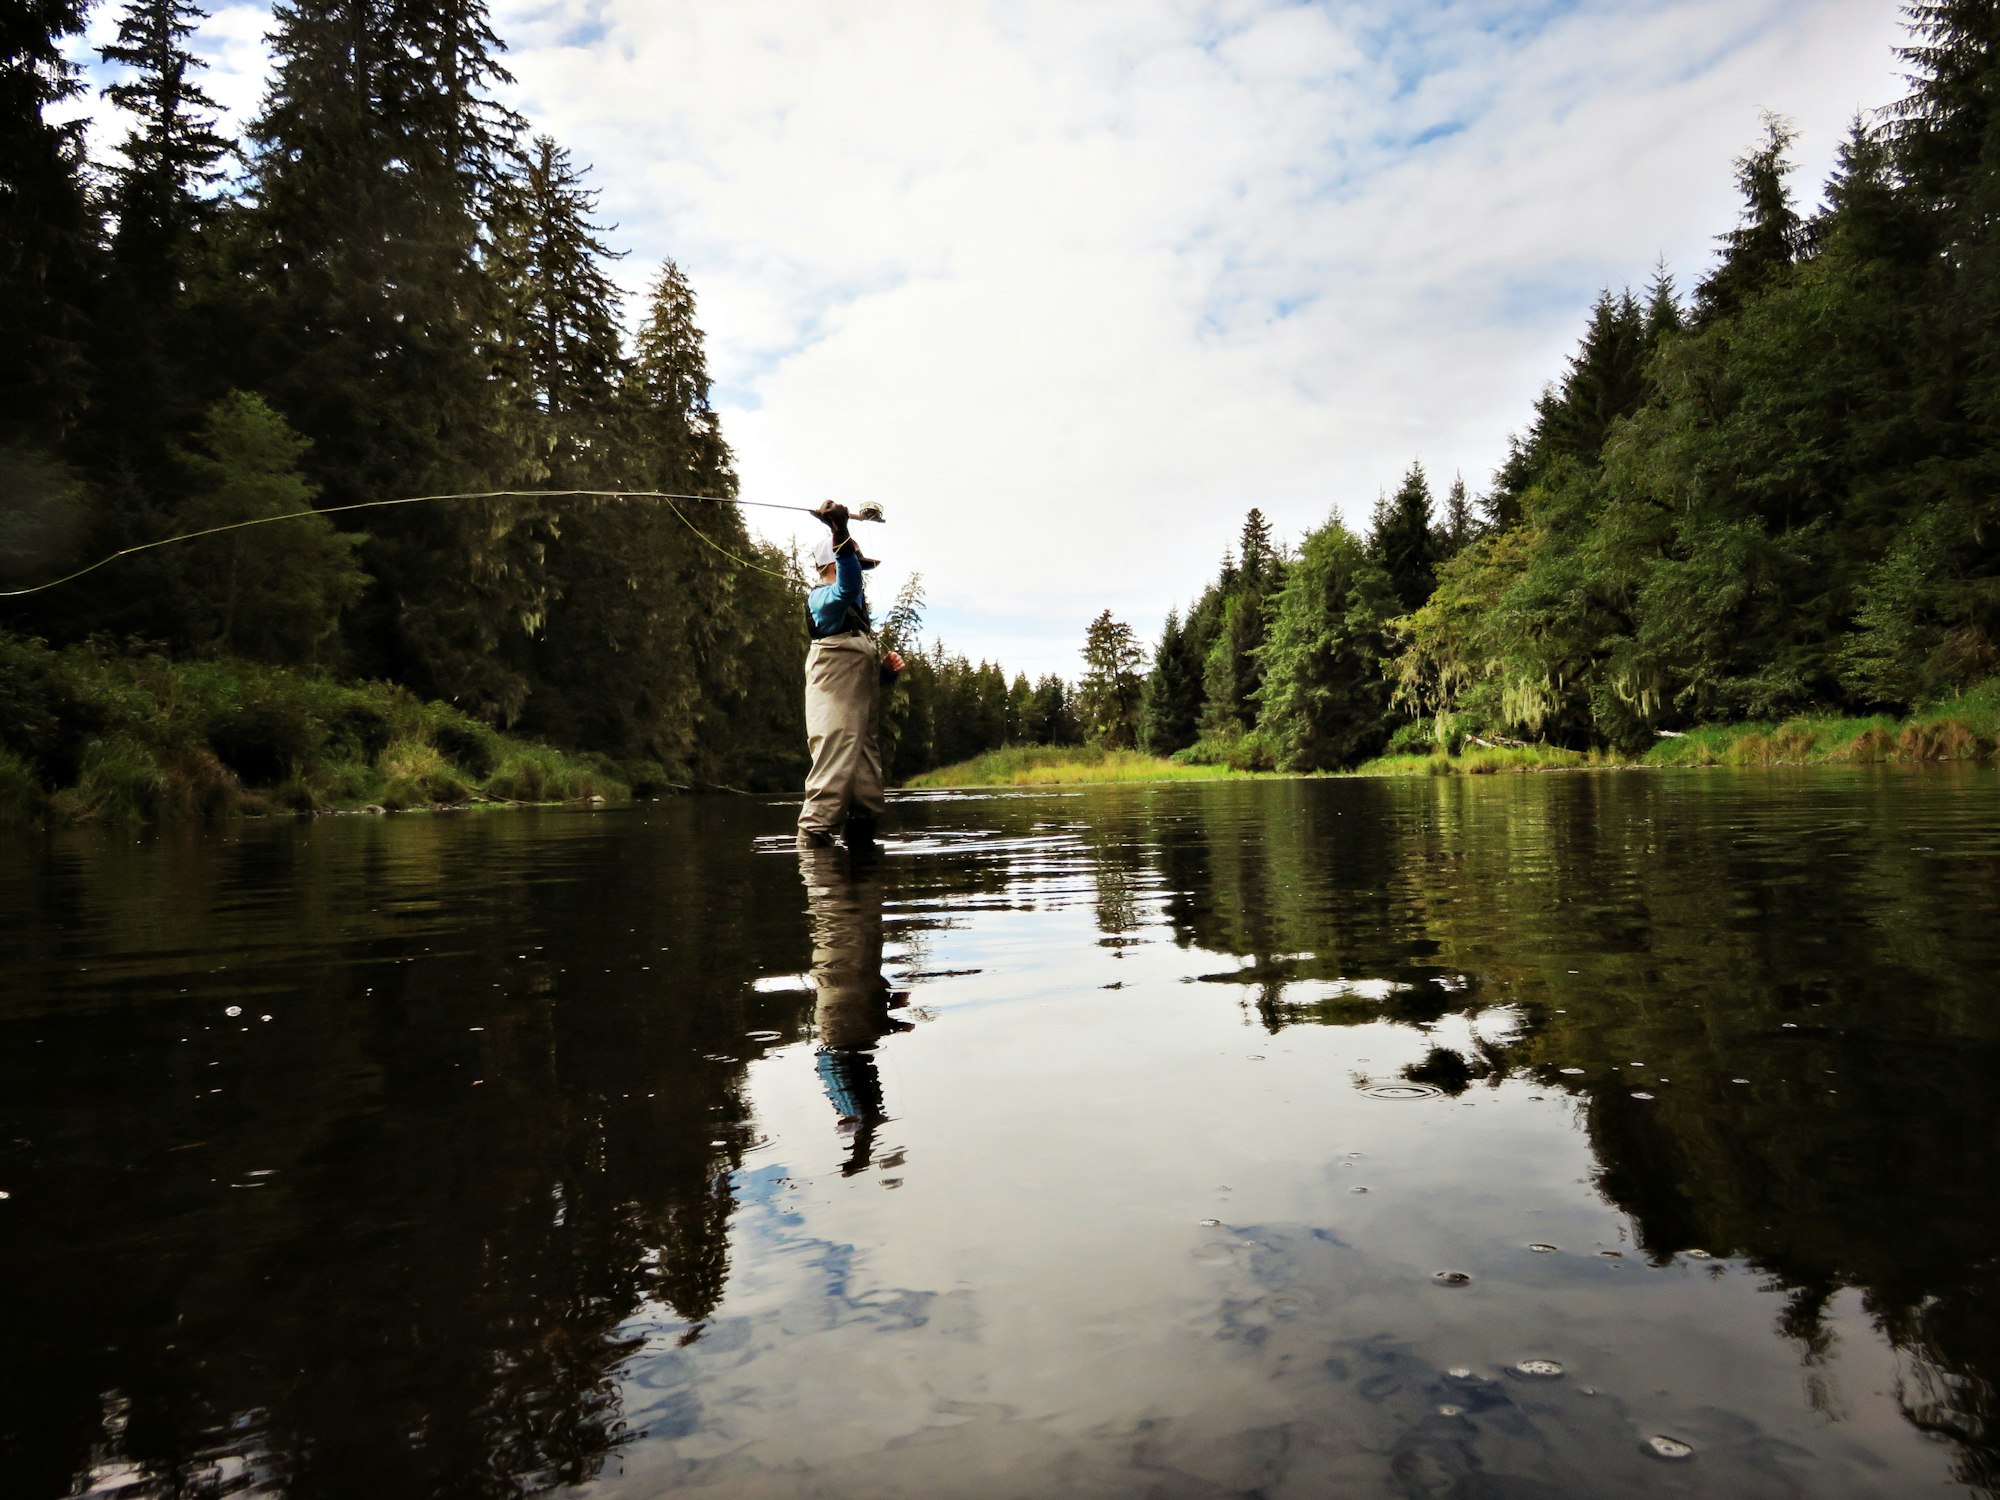 FLY FISHING WILD EXPERIENCE CATCH YOUR NEXT TROPHY